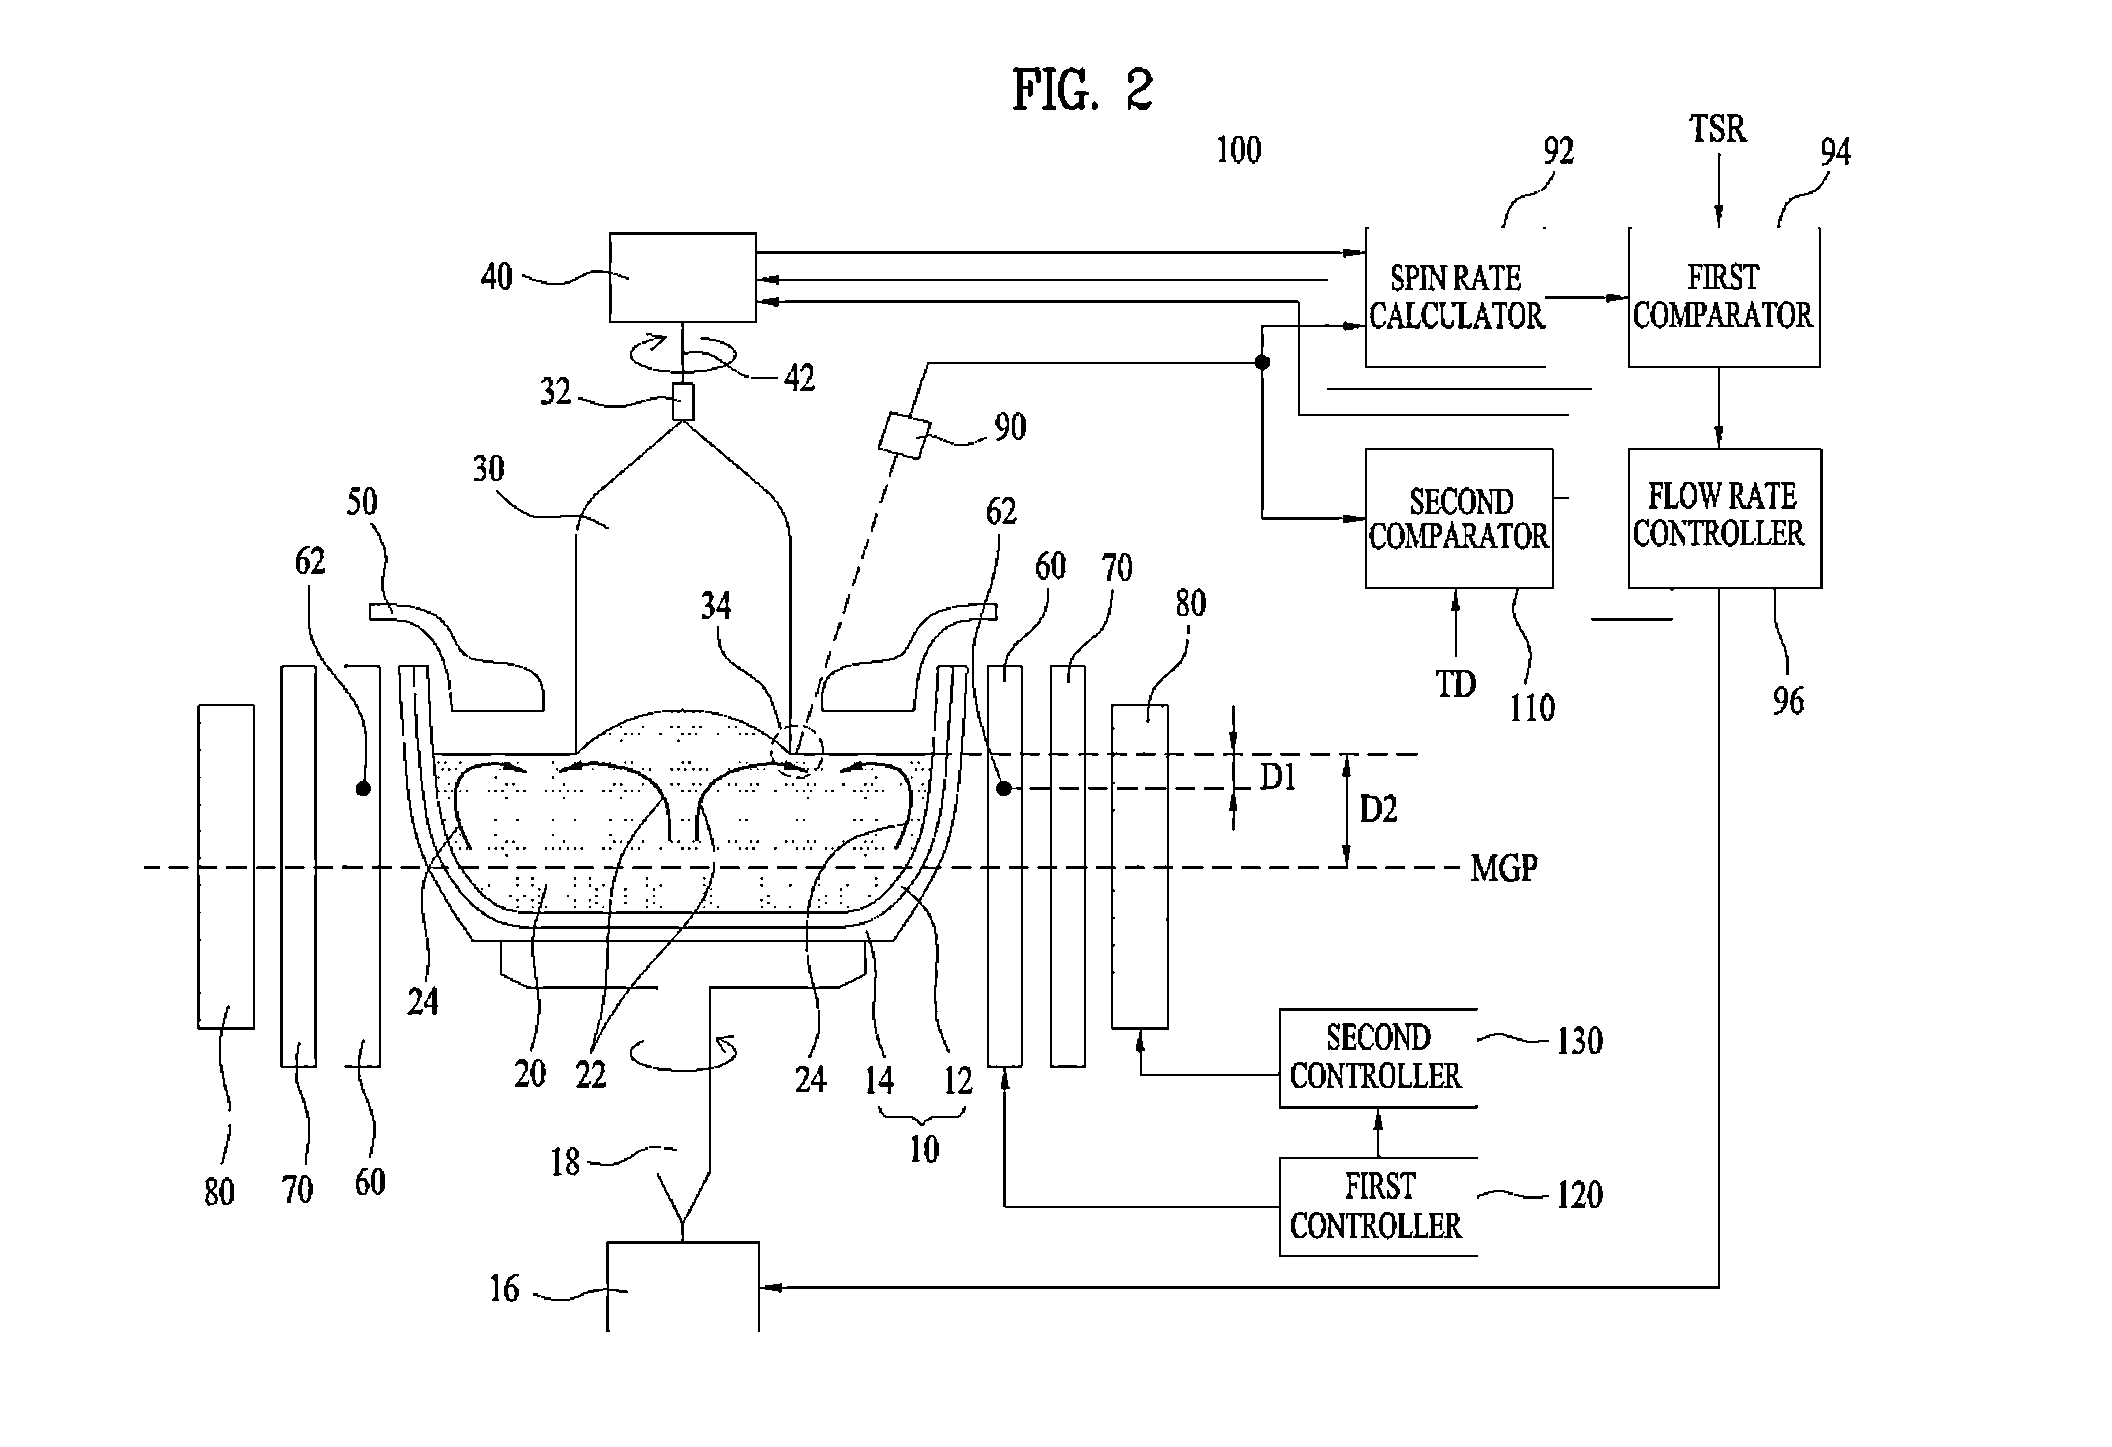 Single crystal silicon ingot and wafer, and apparatus and method for growing said ingot